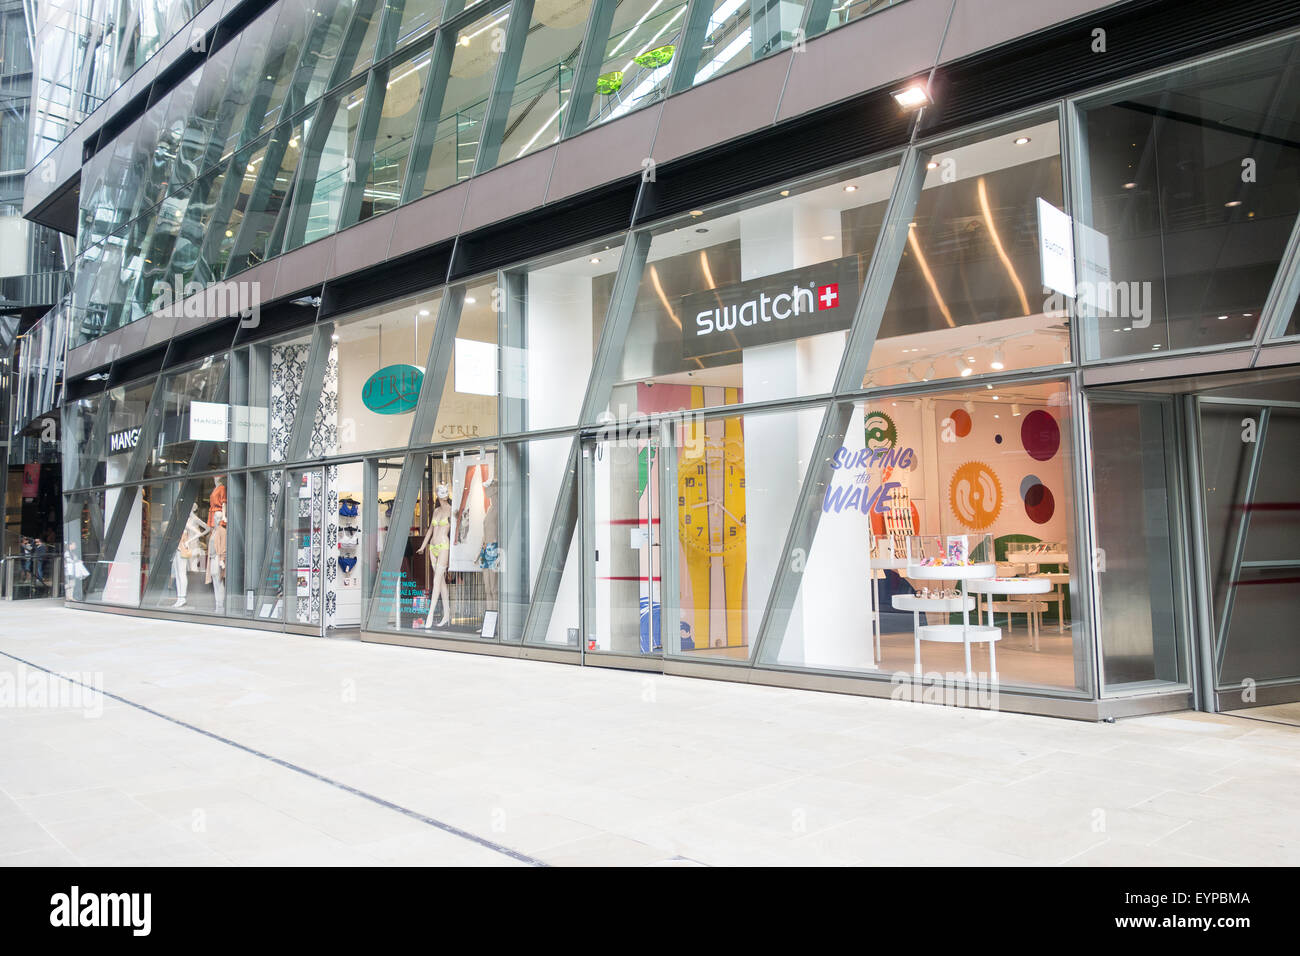 The Swatch Shop in One New Change in St Pauls, City of London. Stockfoto